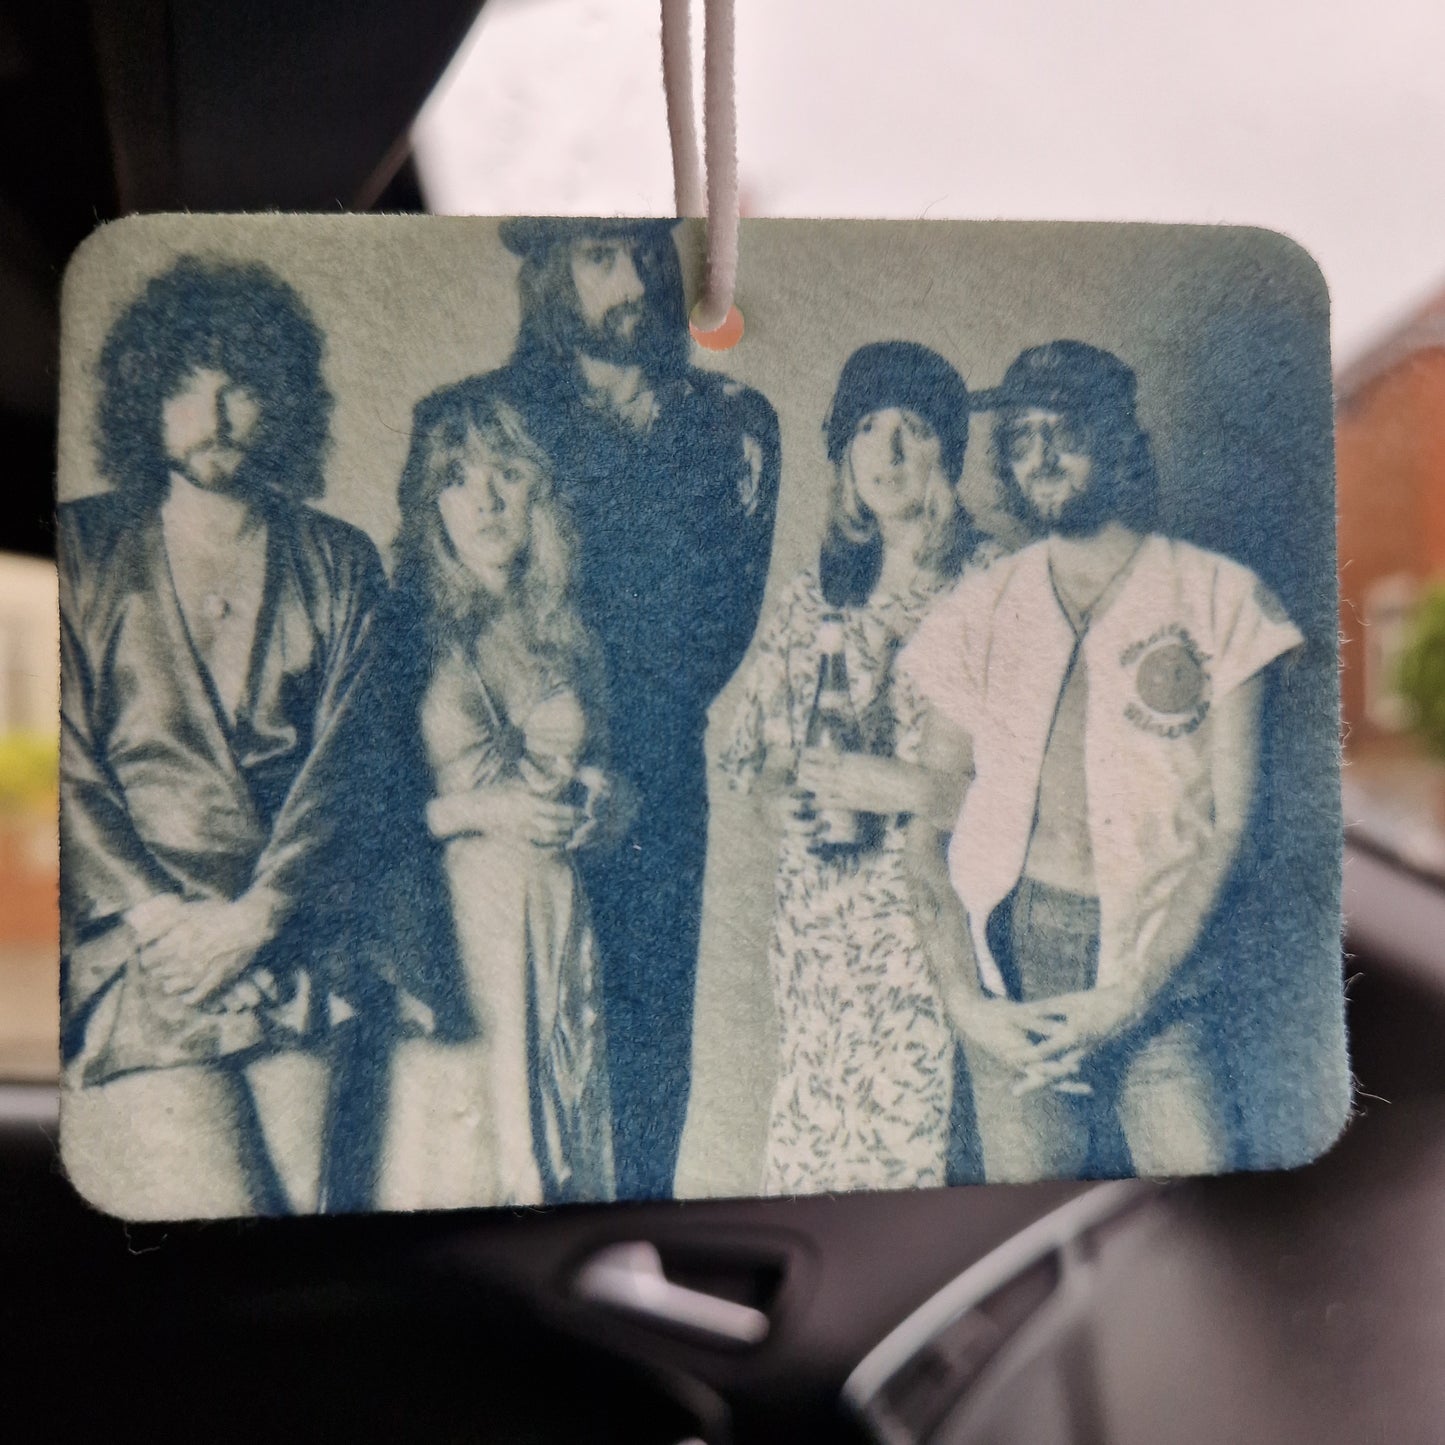 fleetwood  mac group image picture car air freshener photo gift for music lover landscape qty 1